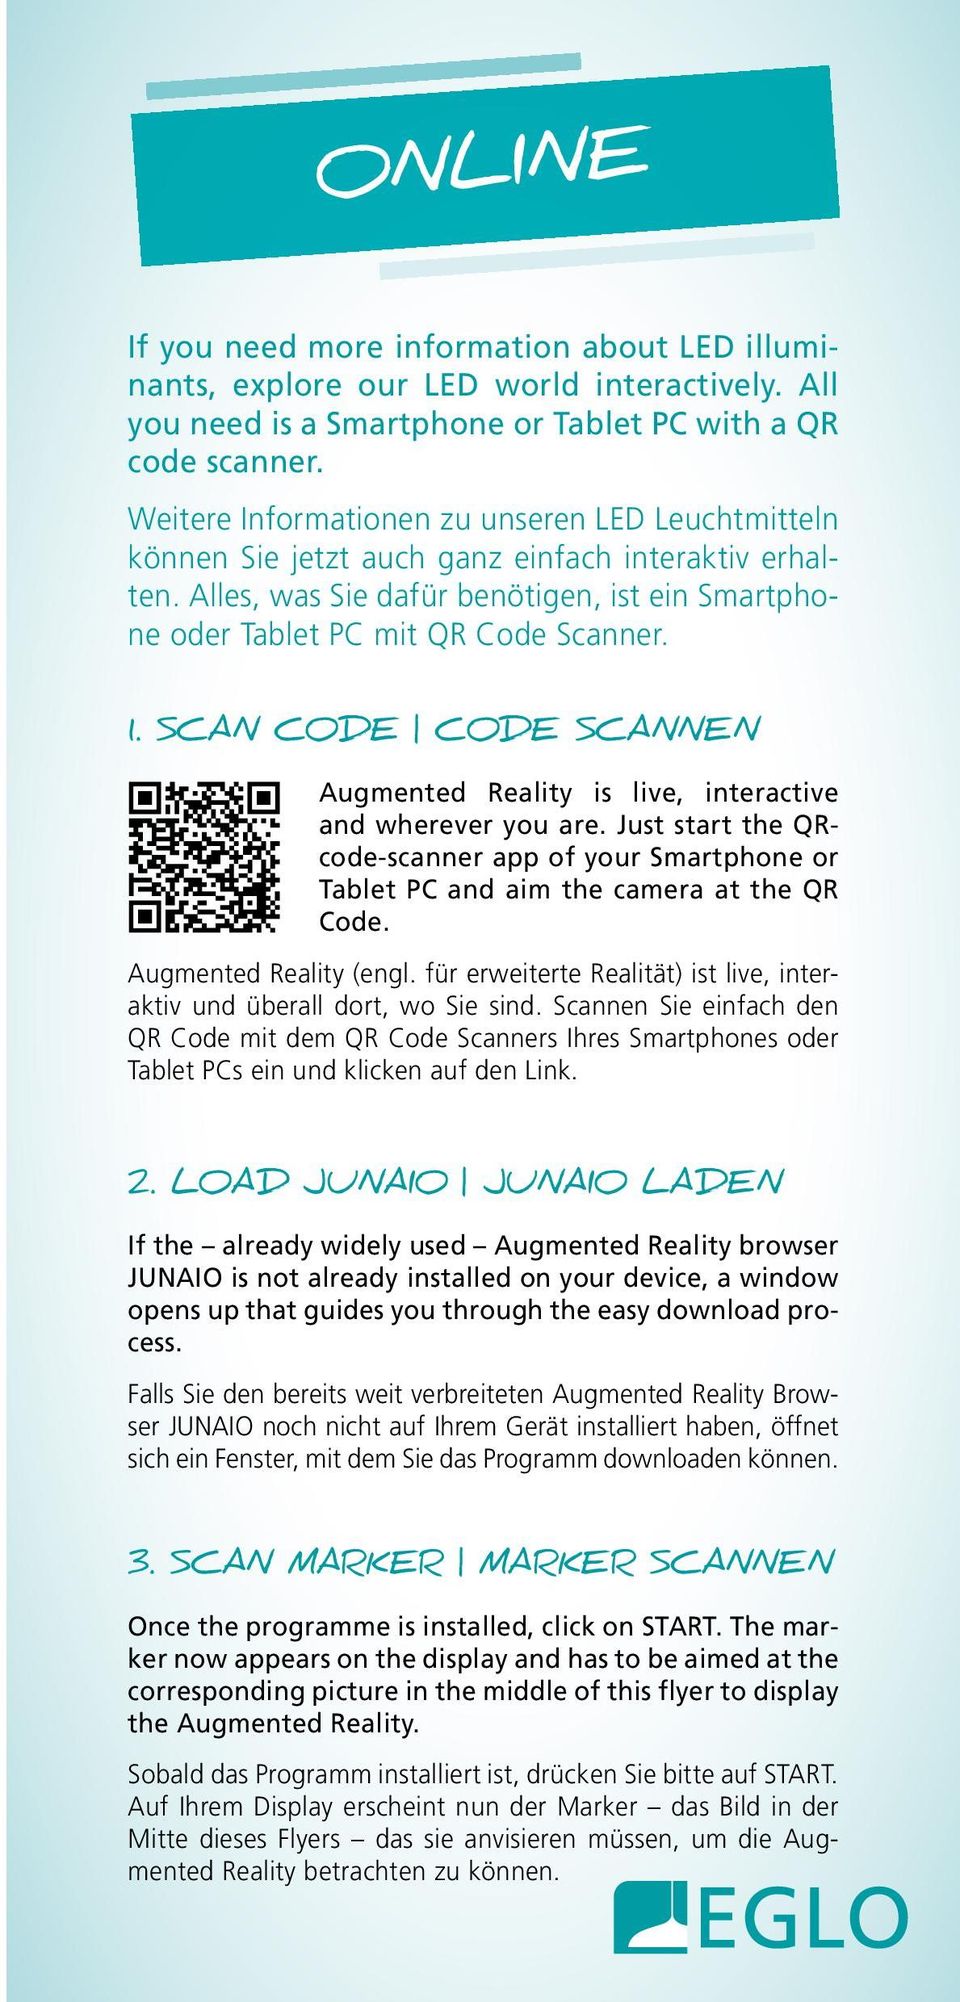 SCAN CODE CODE SCANNEN Augmented Reality is live, interactive and wherever you are. Just start the QRcode-scanner app of your Smartphone or Tablet PC and aim the camera at the QR Code.